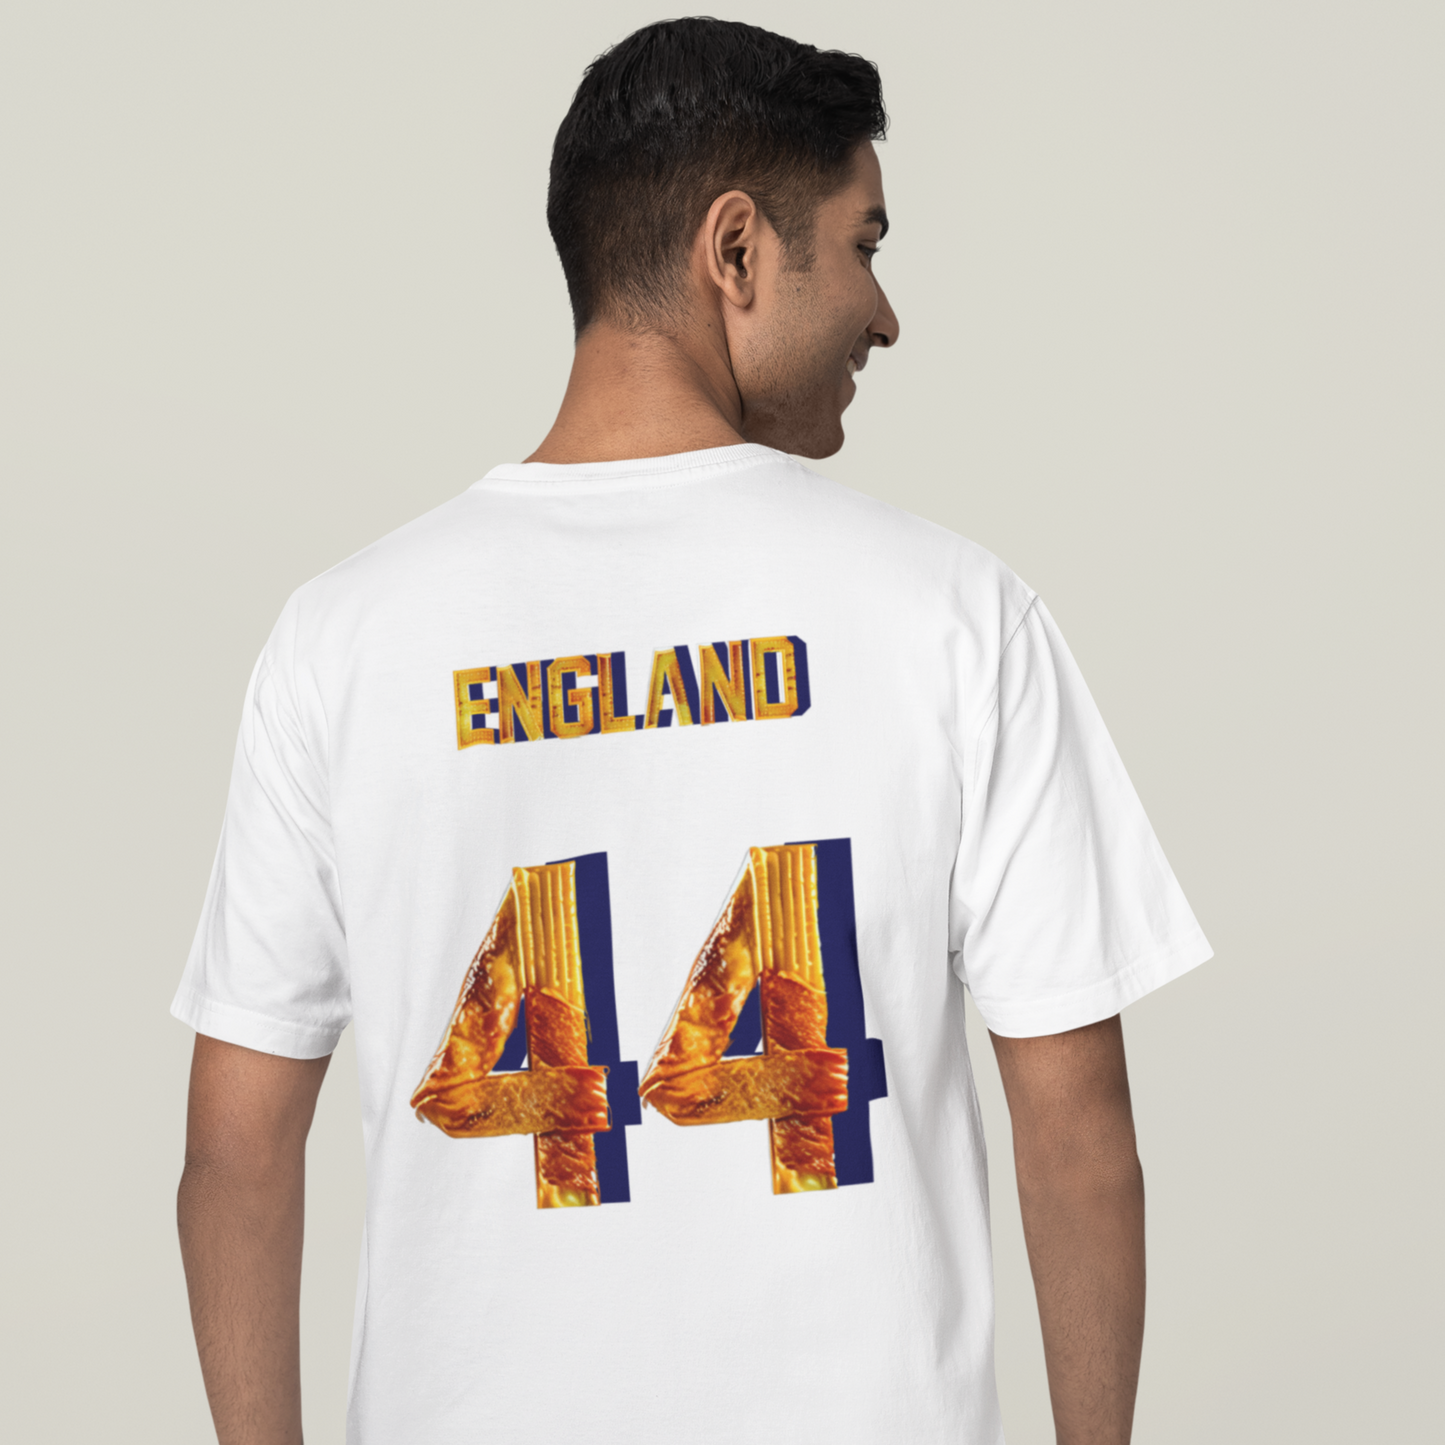 England Fish And Chips Jersey - T-Shirt Unisex